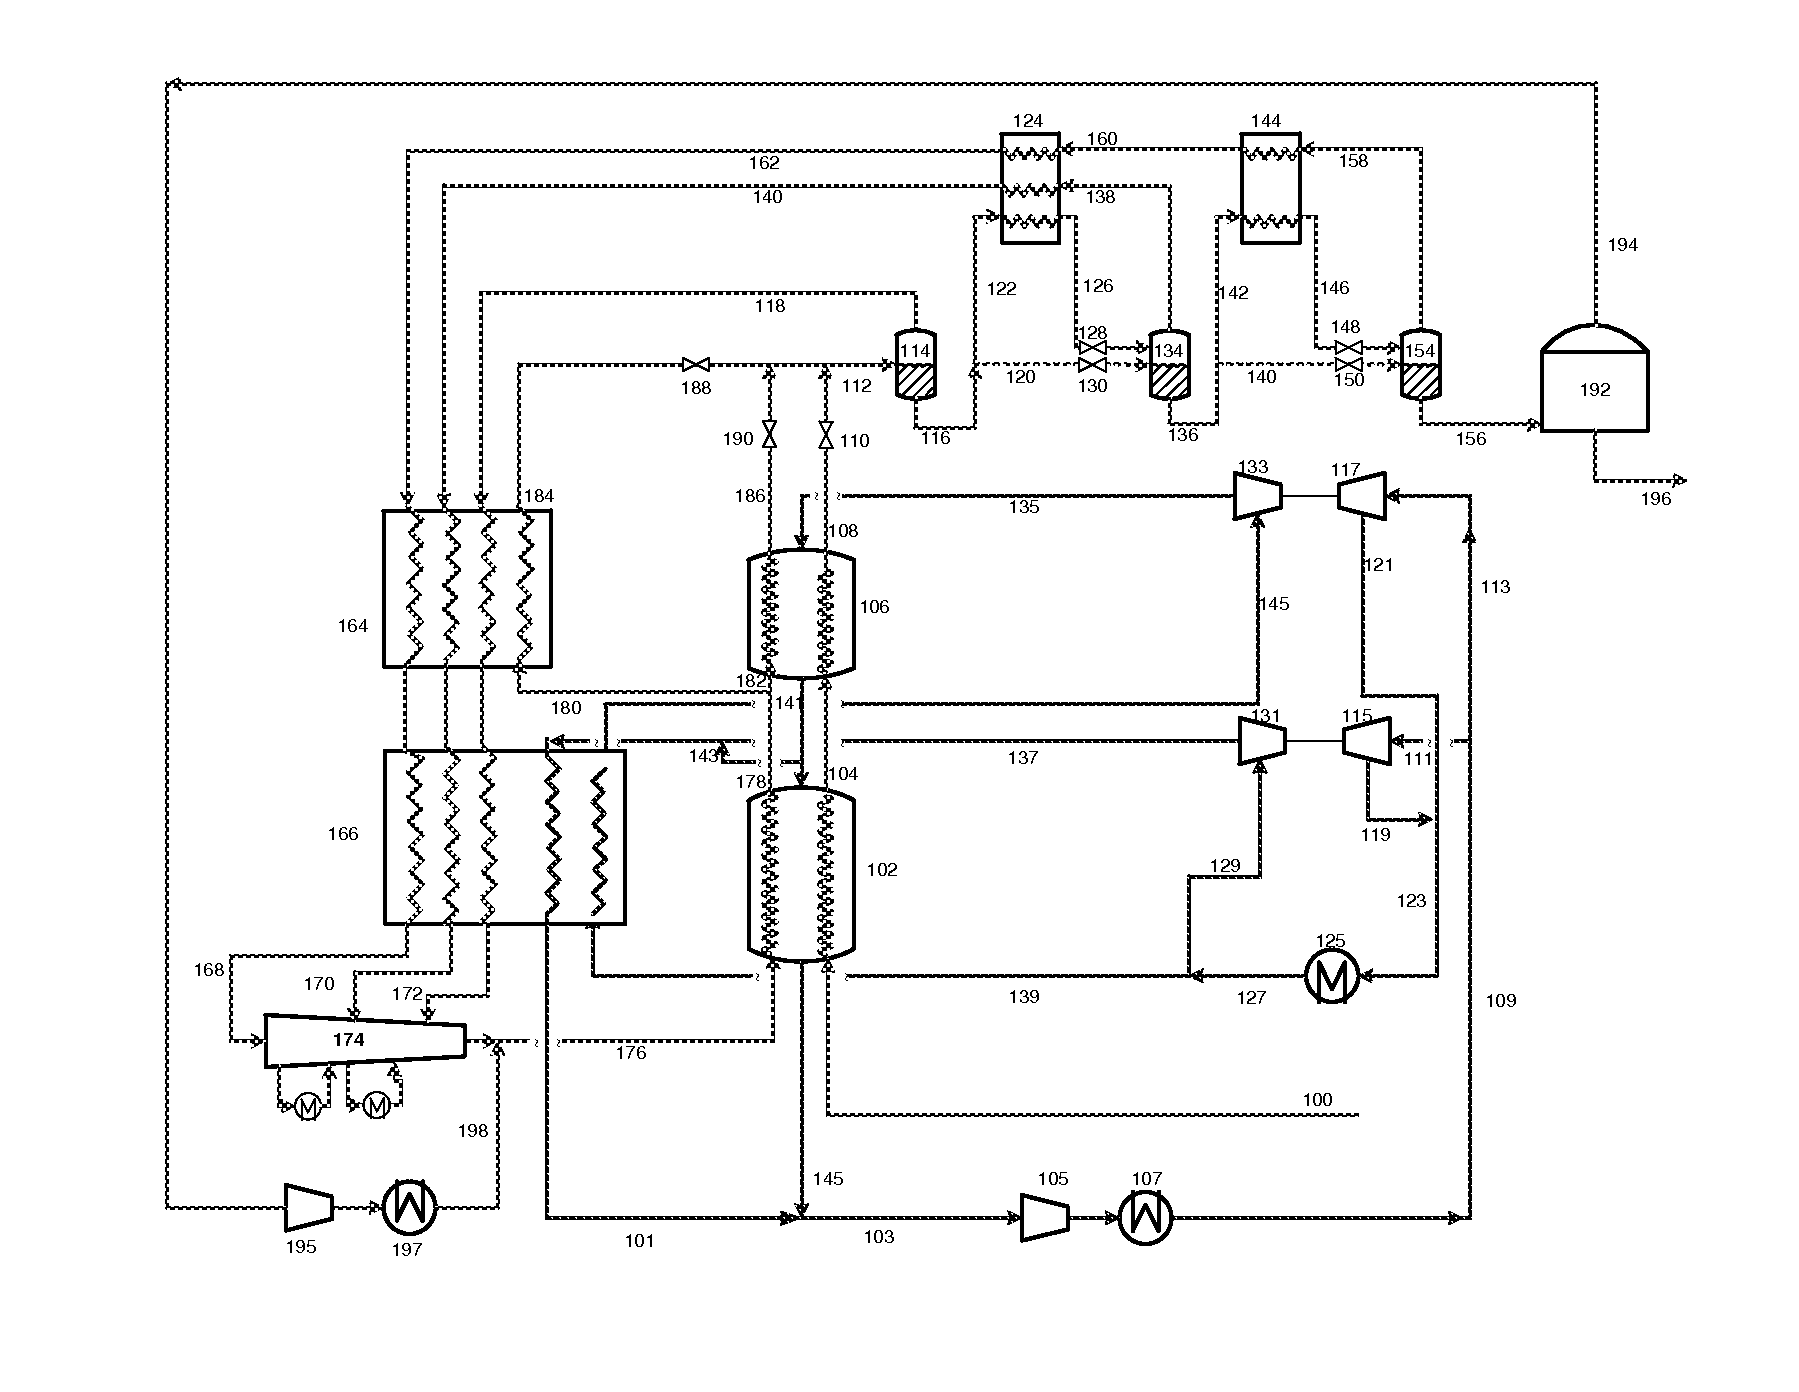 Integrated Methane Refrigeration System for Liquefying Natural Gas